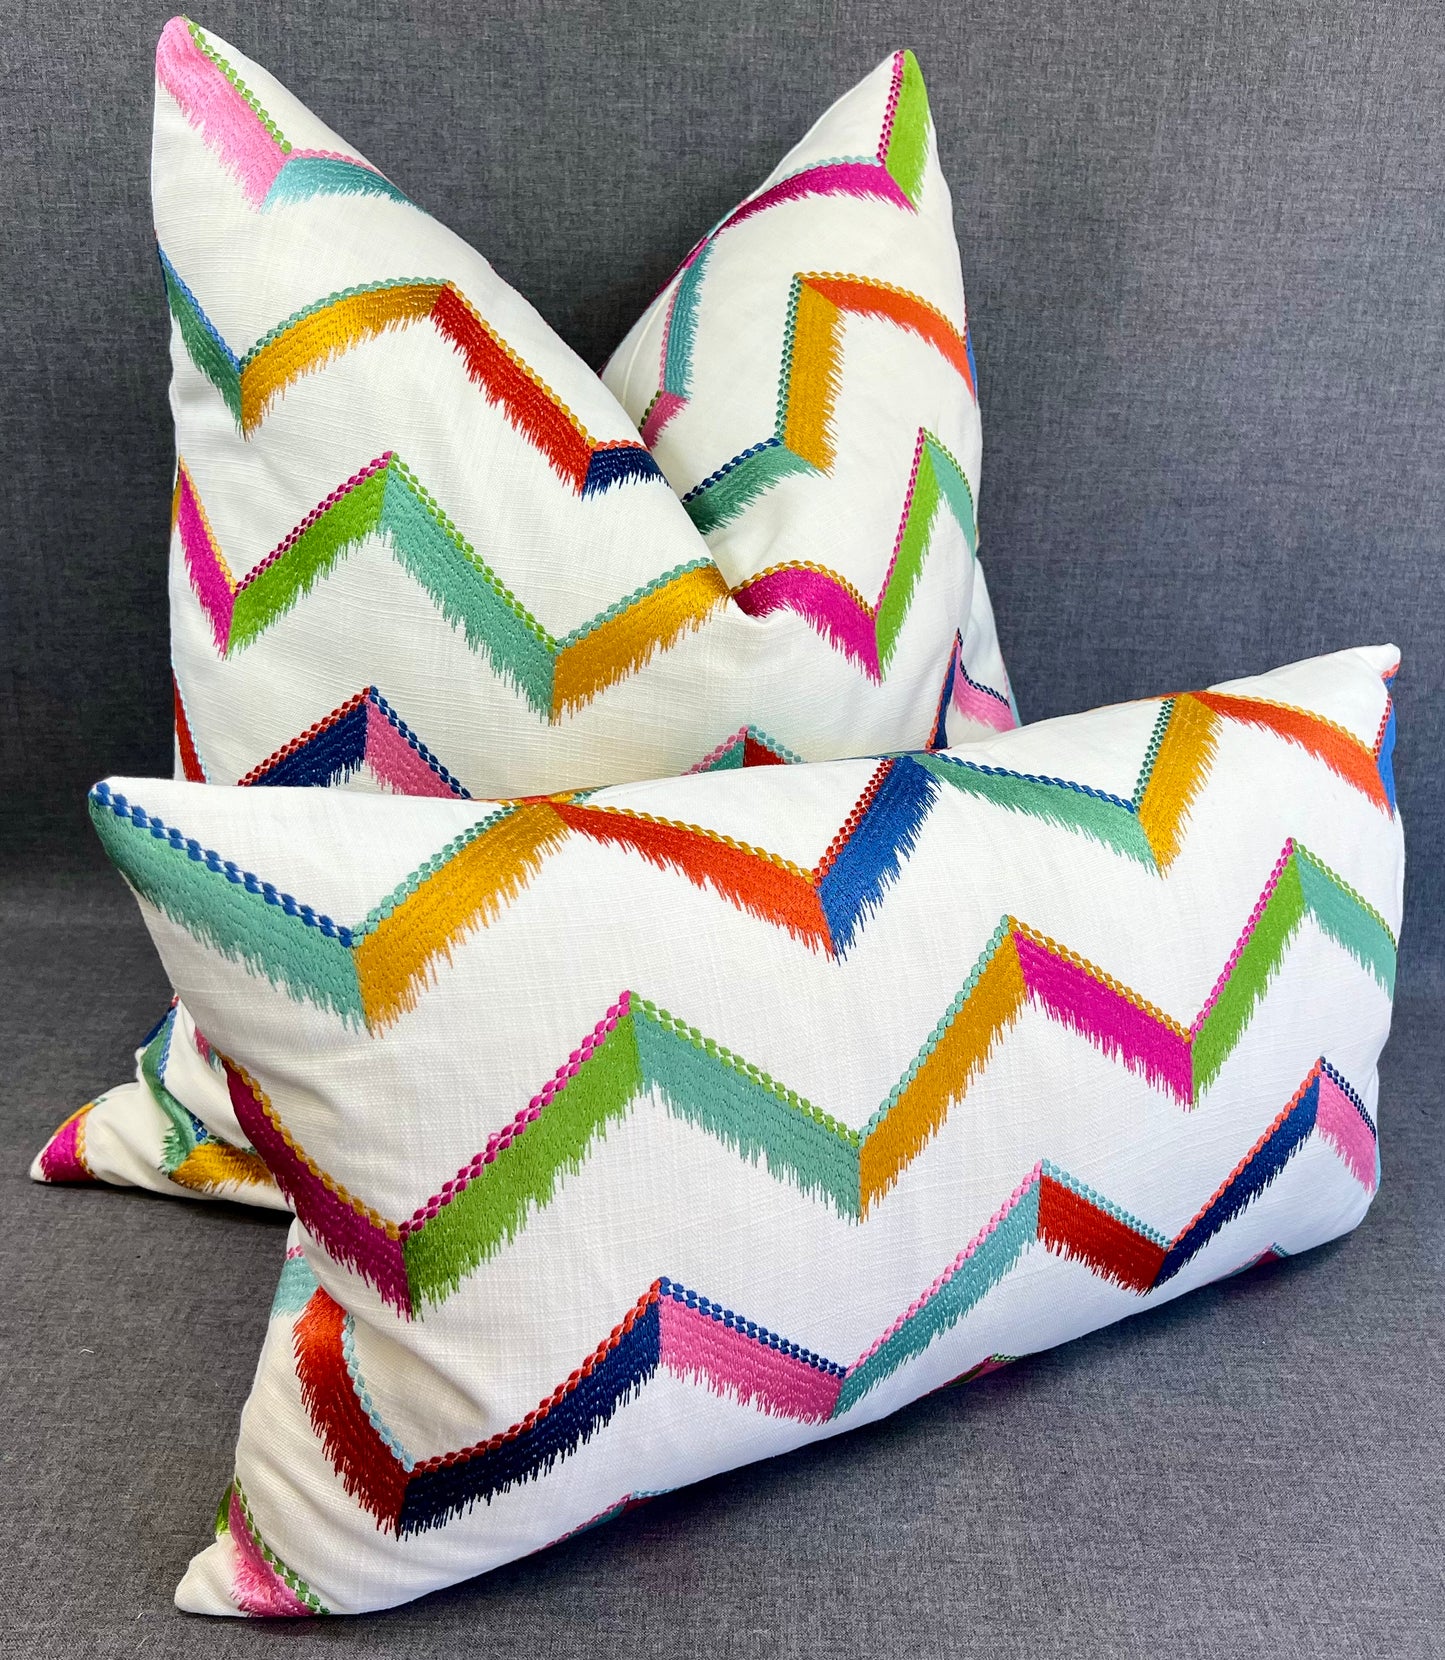 Luxury Pillow -  24" x 24" - Chevron Confetti; Bright embroidered chevrons of pinks, greens blues, golds and oranges on a white linen textured background